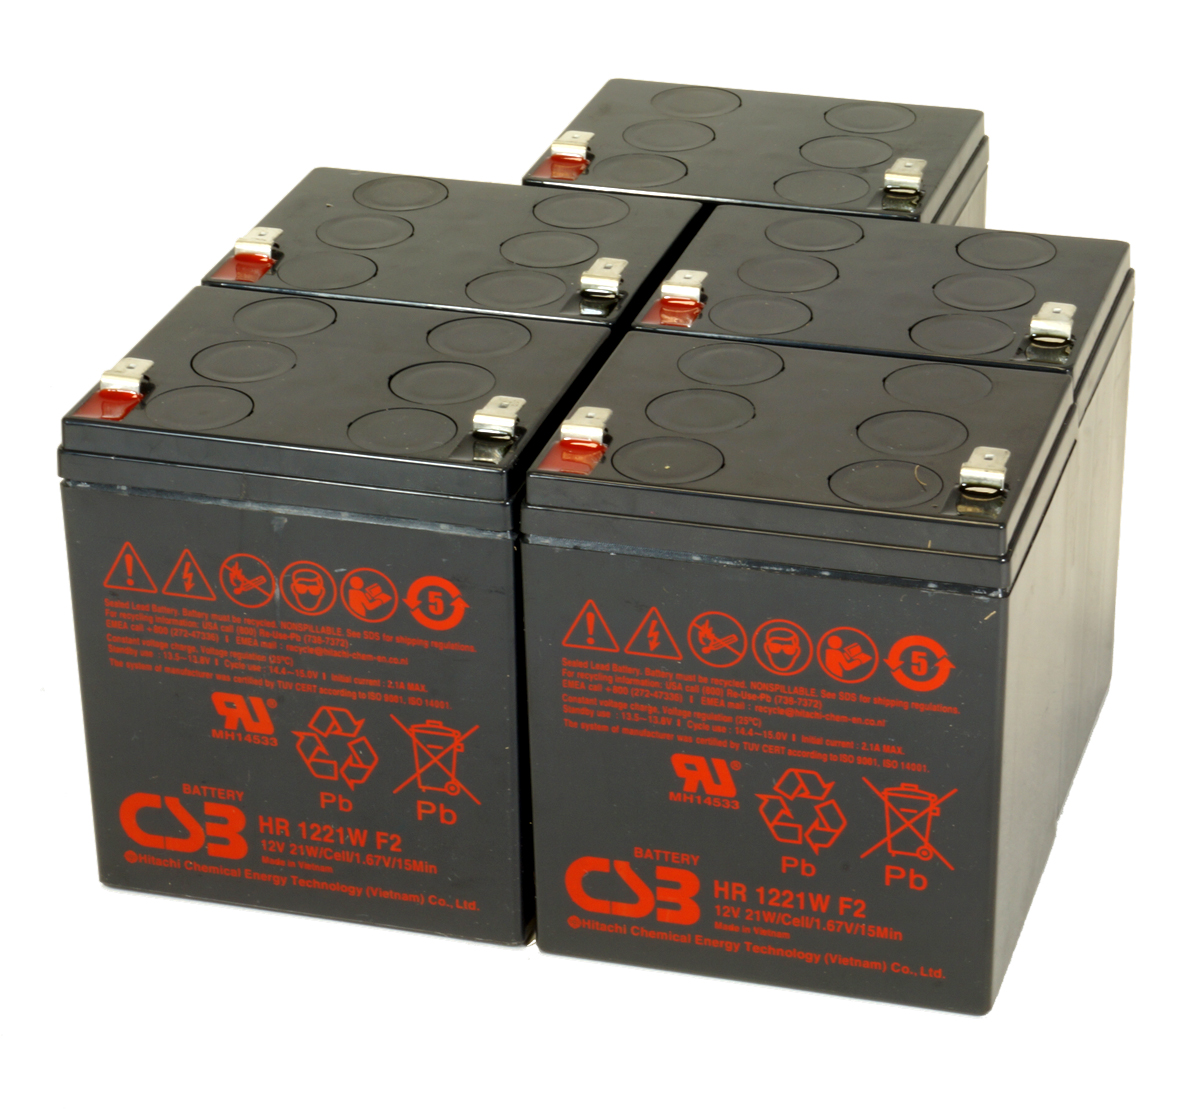 MDS2525 UPS Battery Kit for MGE AB2525